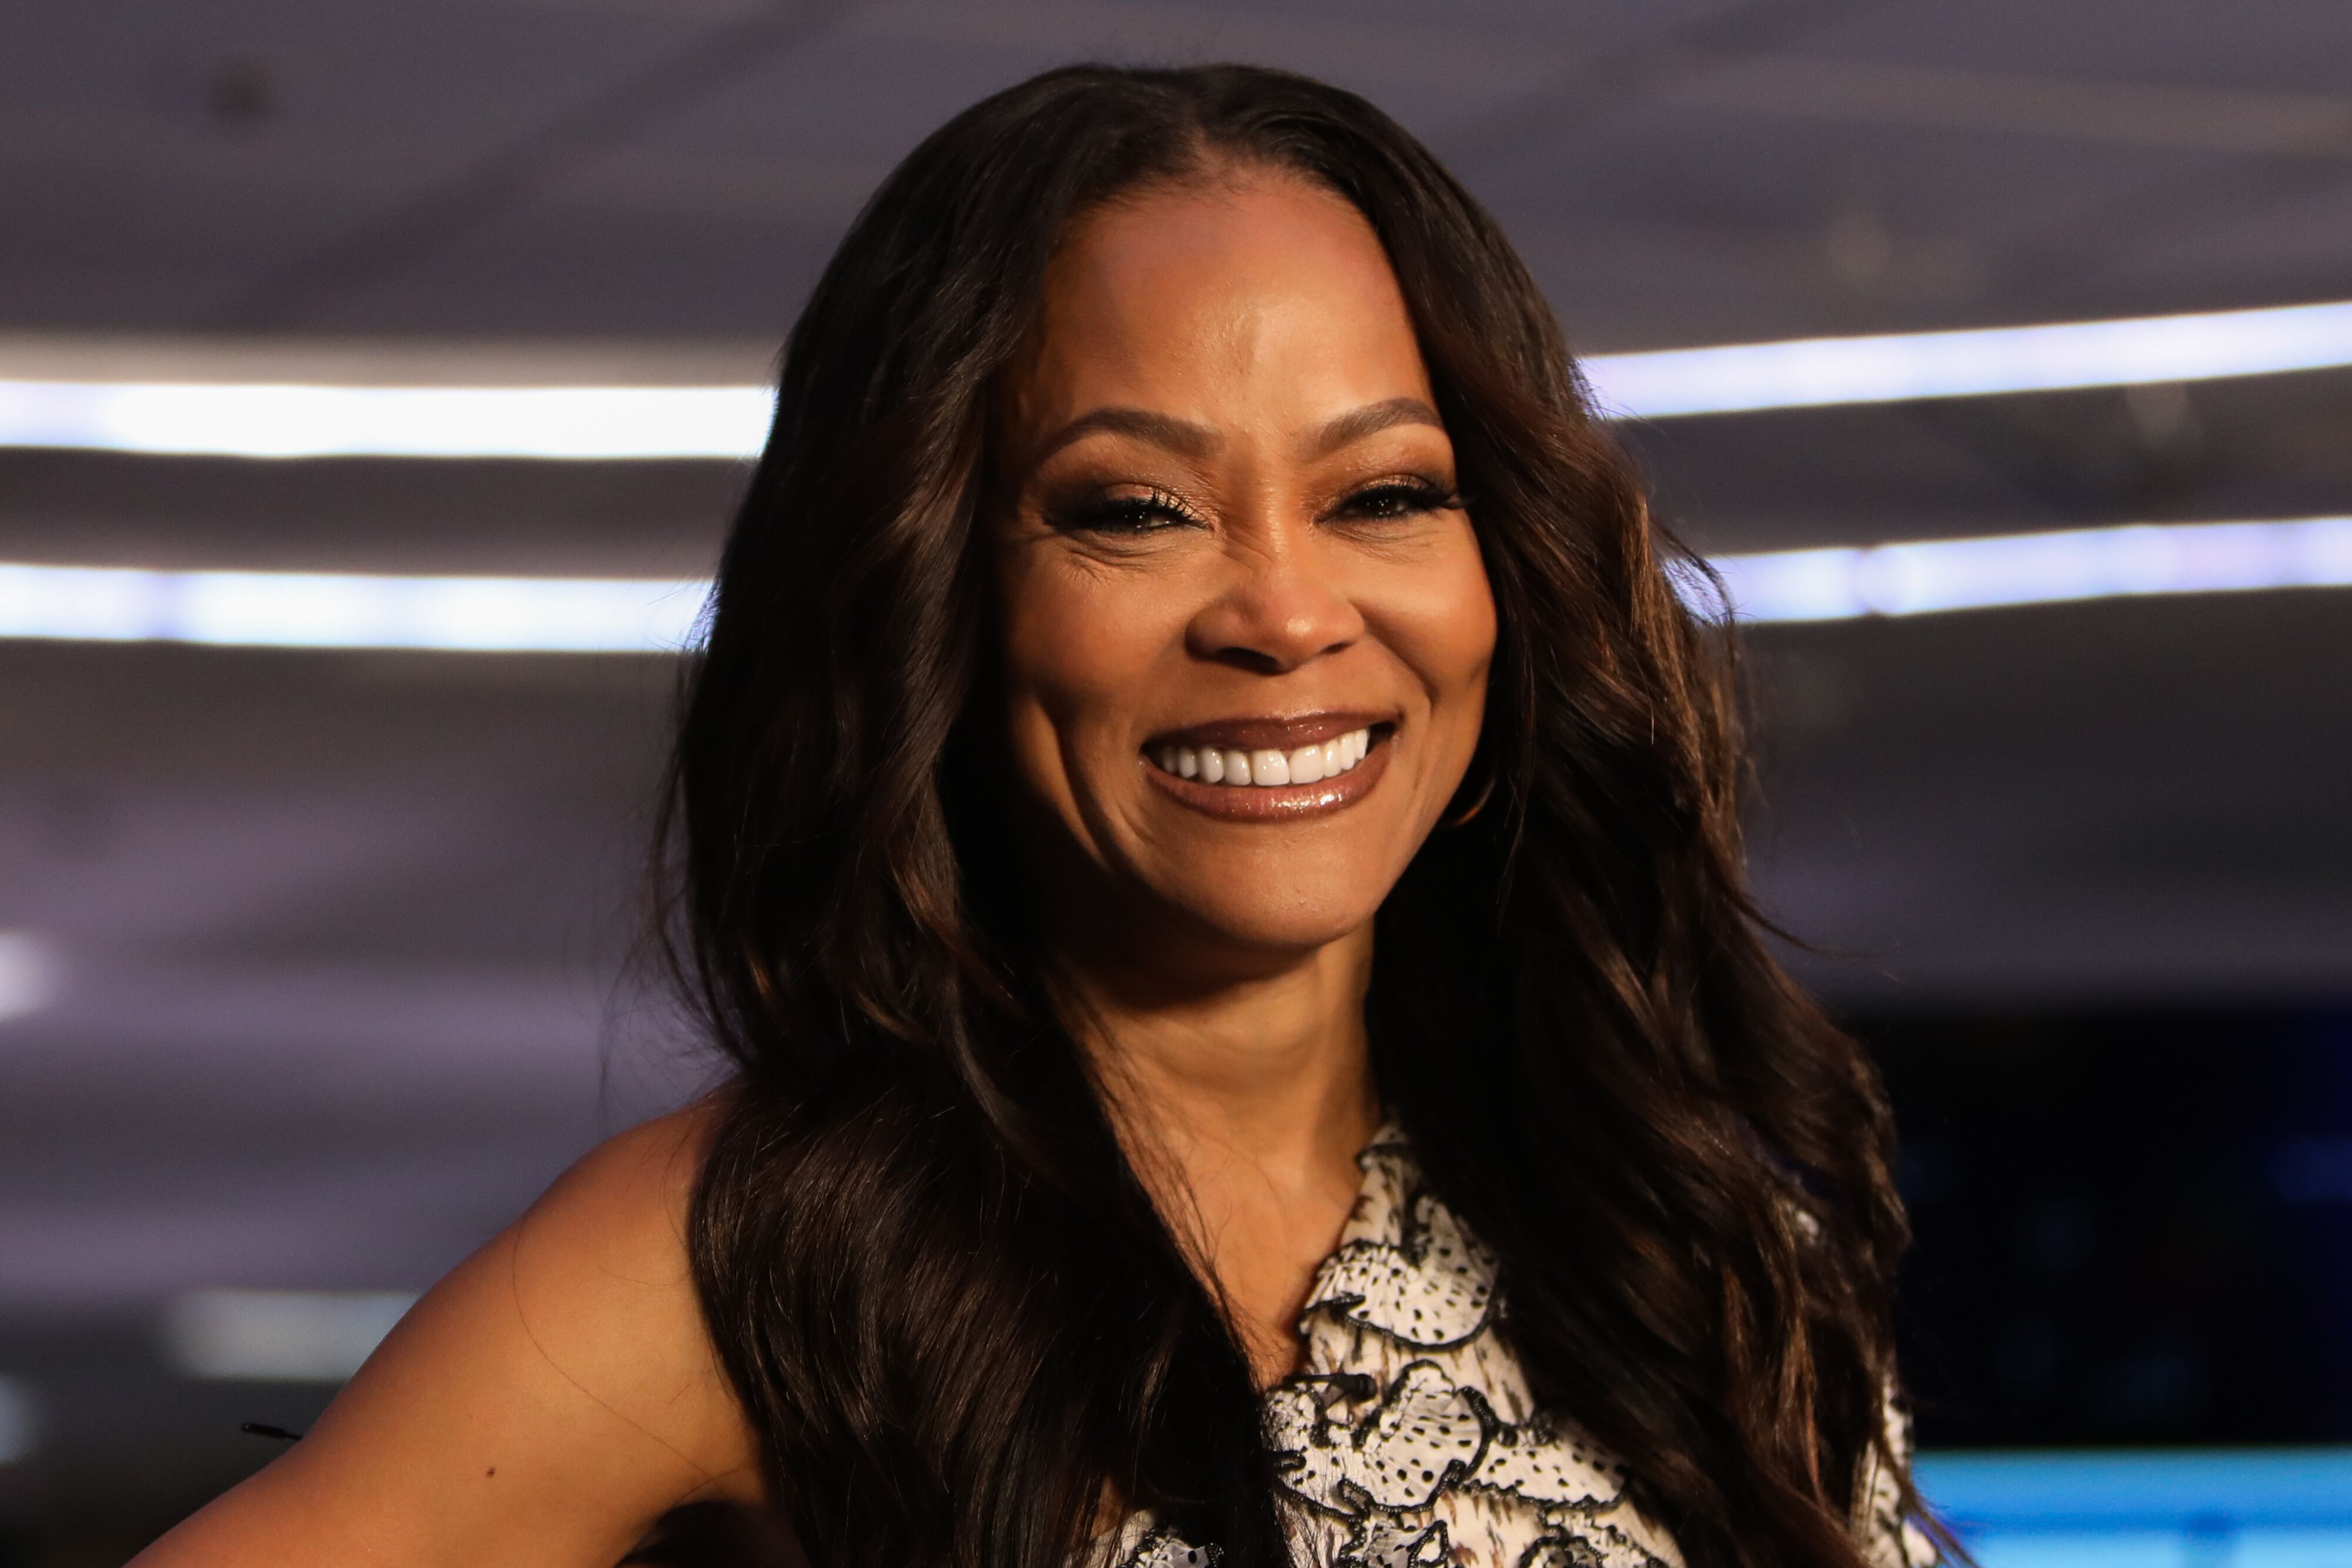 A portrait of Robin Givens attending a public event | Source: Getty Images/GlobalImagesUkraine